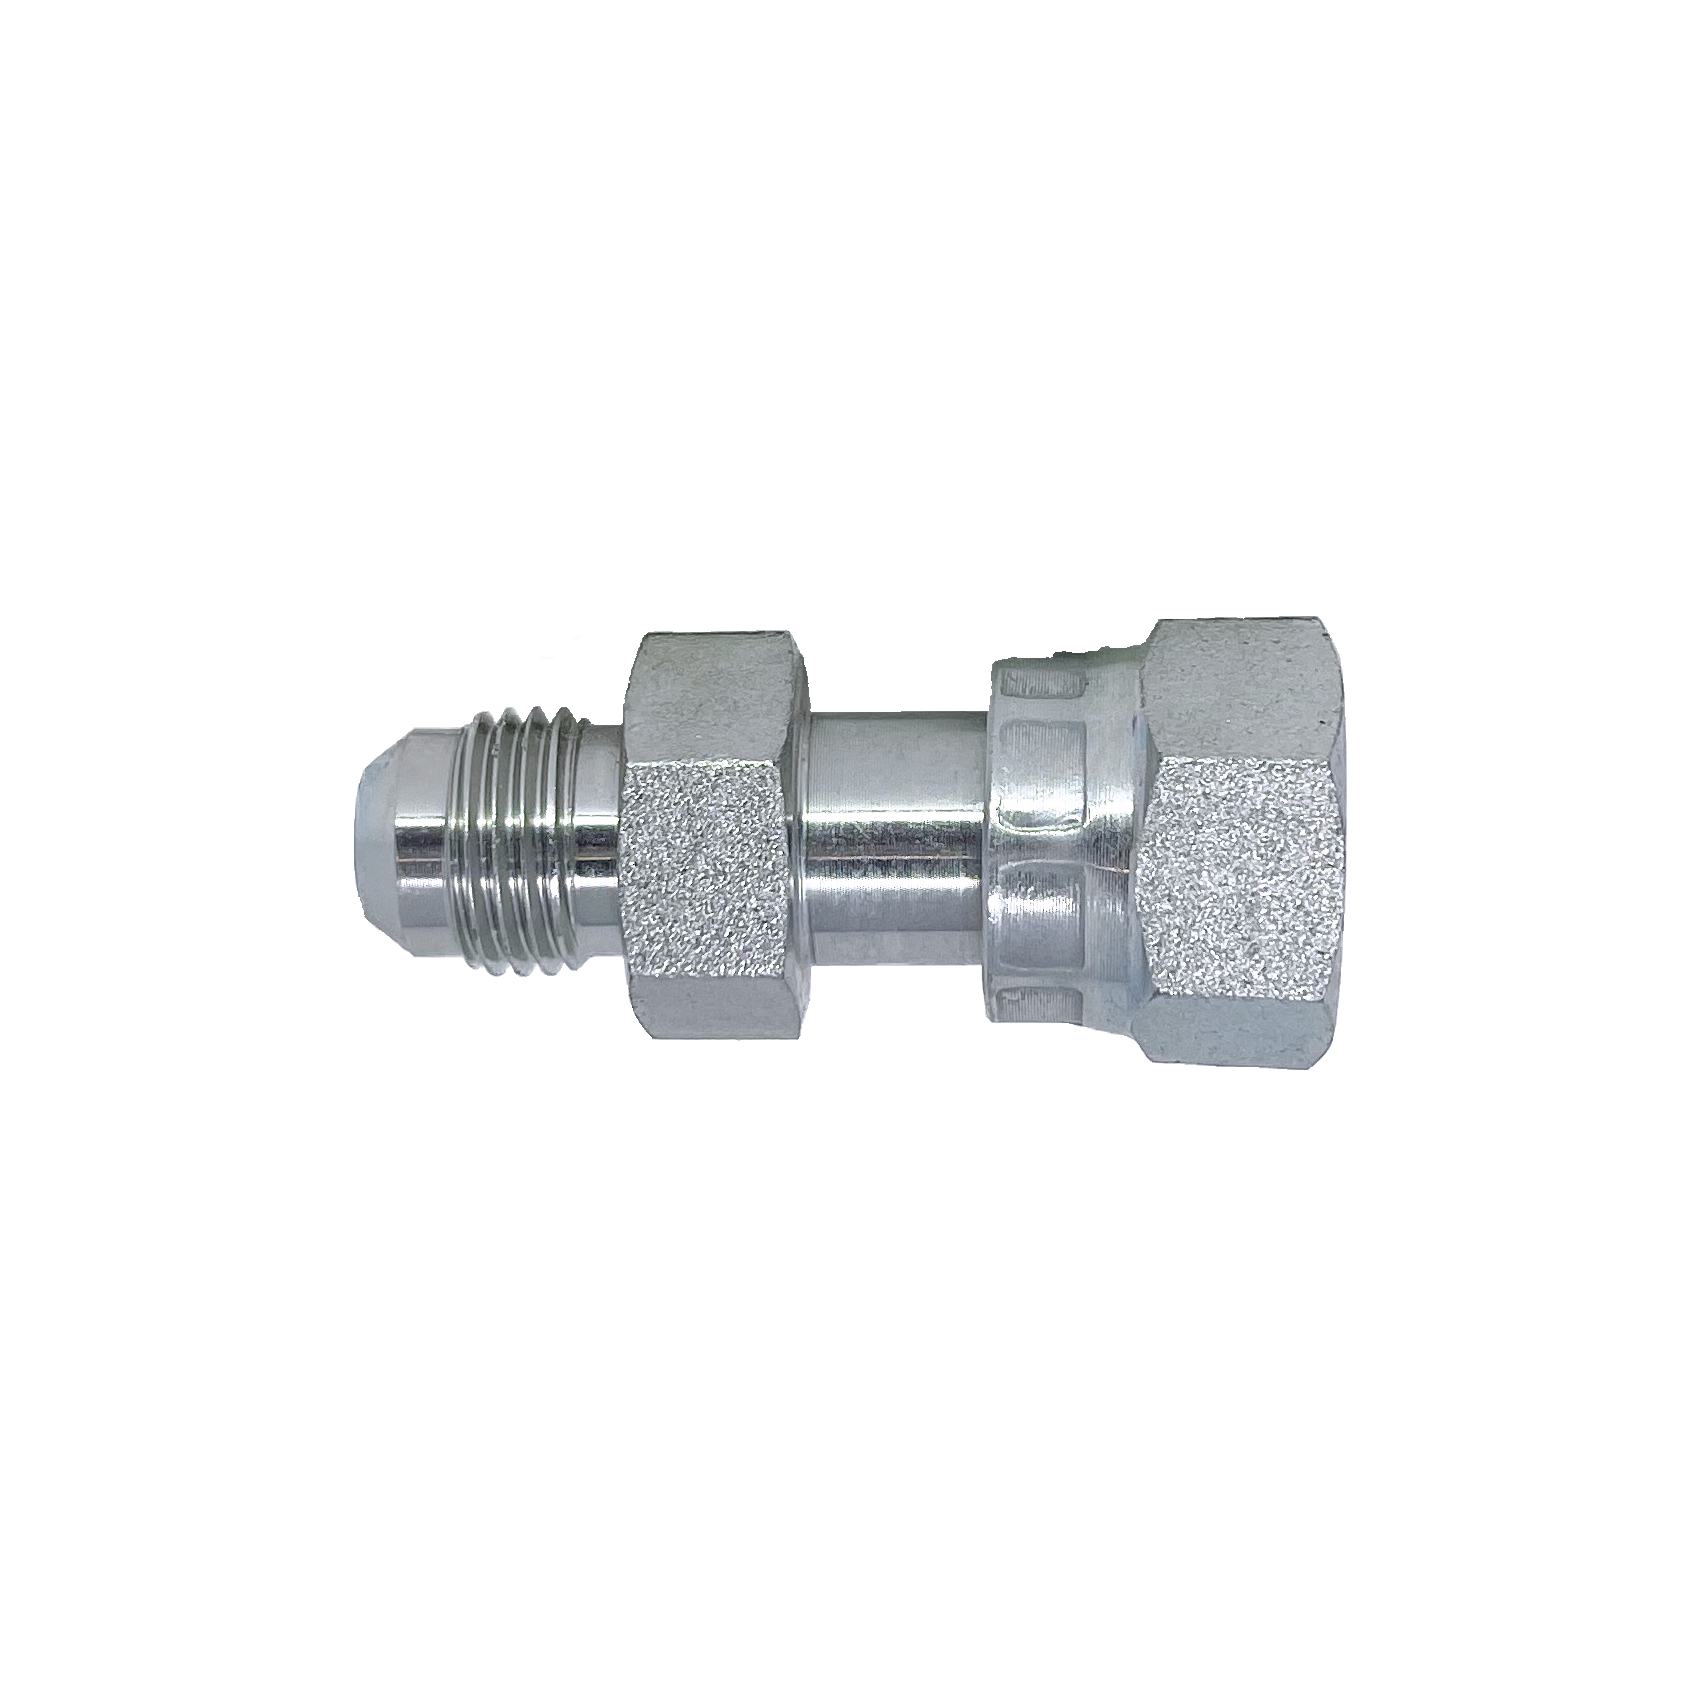 6620-06-06 : Adaptall Straight Adapter, Male 0.375 (3/8") JIC x Female 0.375 (3/8") ORFS, Carbon Steel